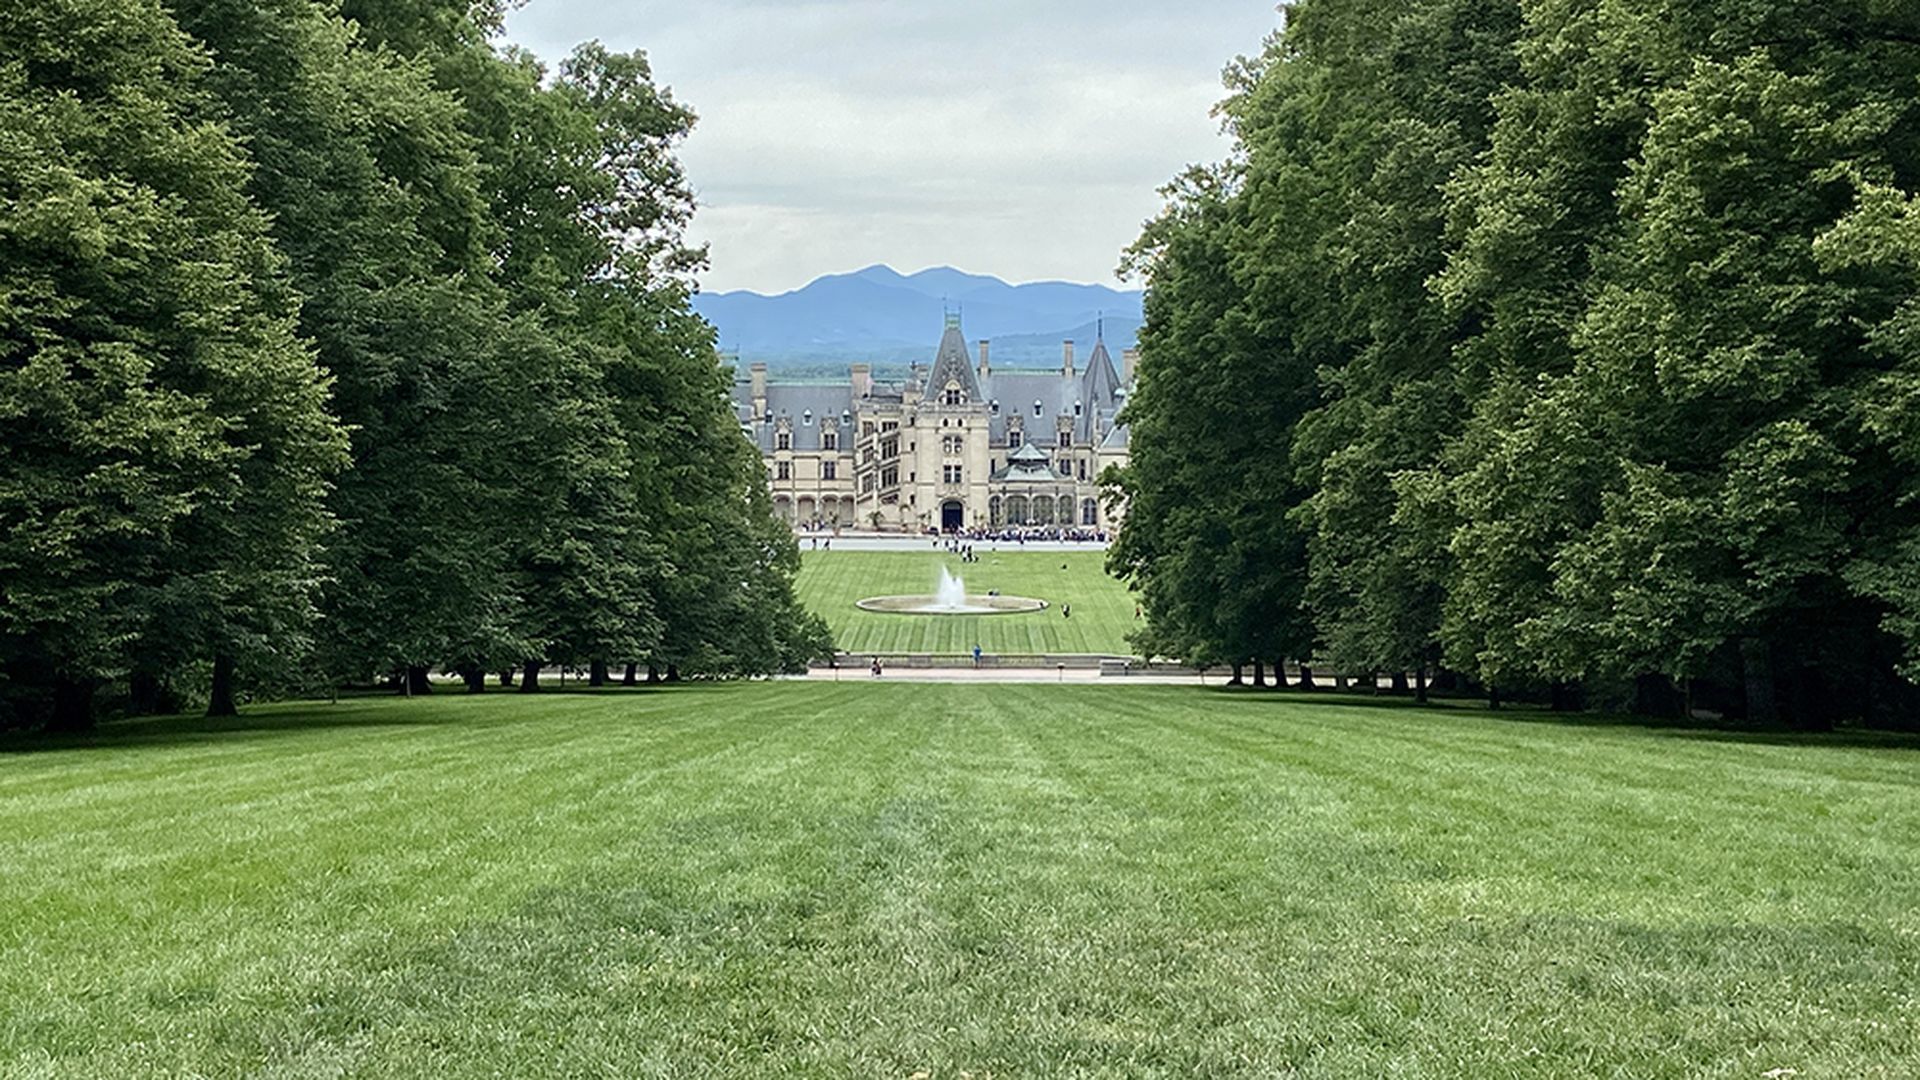 Biltmore Estate in Asheville with the Blue Ridge Mountains in the background.